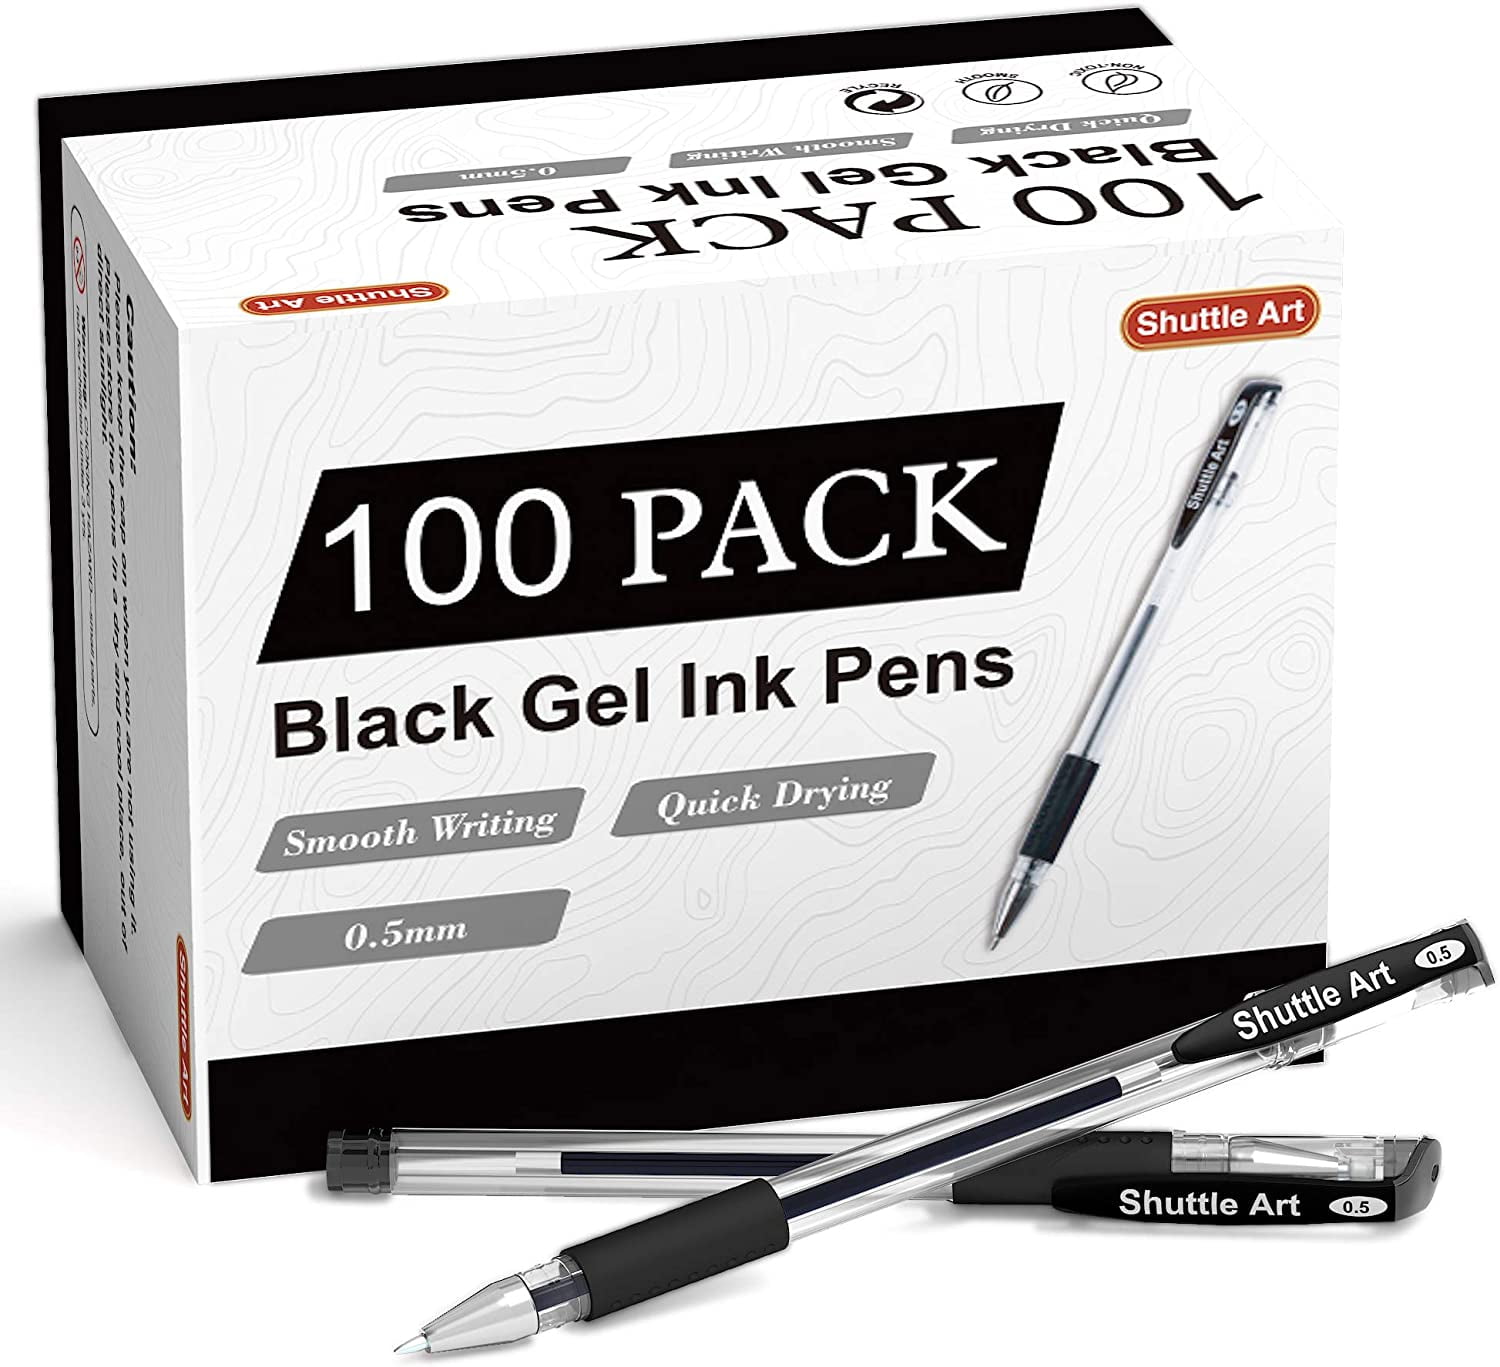 Shuttle Art Black Gel Pens, 100 Pack Fine Point Black Ink Pens Bulk, 0.5mm Rollerball Gel Ink Pens Smooth Writing with Comfortable Grip for Office, SC